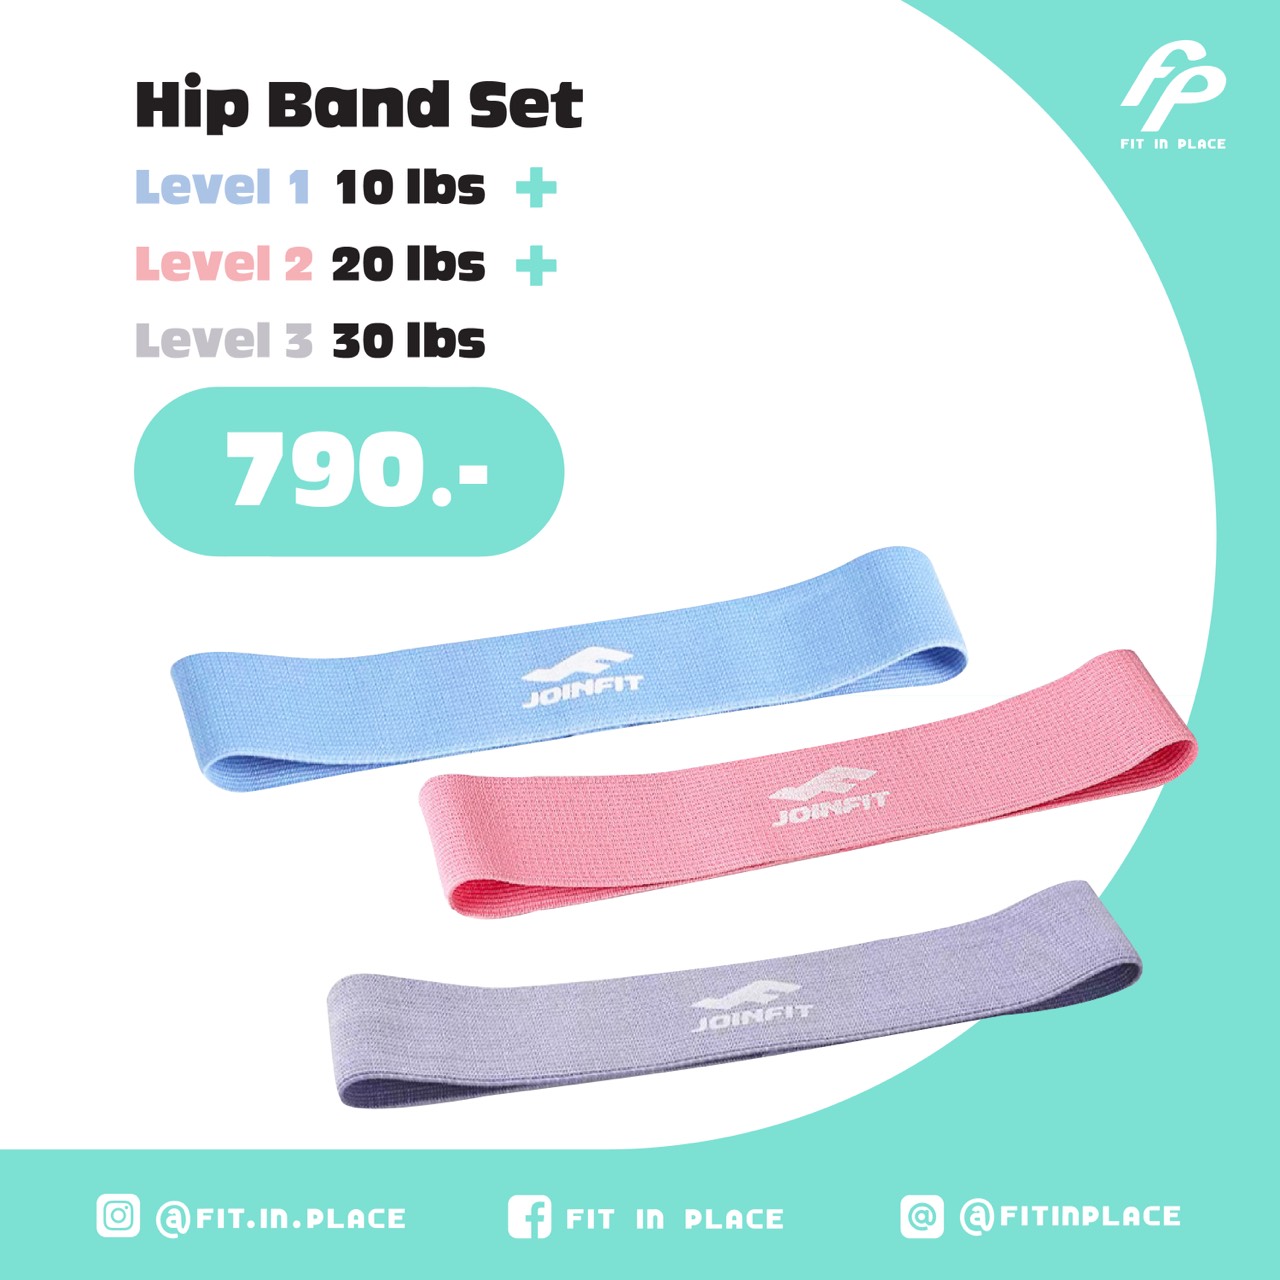 Fit in Place - Joinfit Hip Band Set